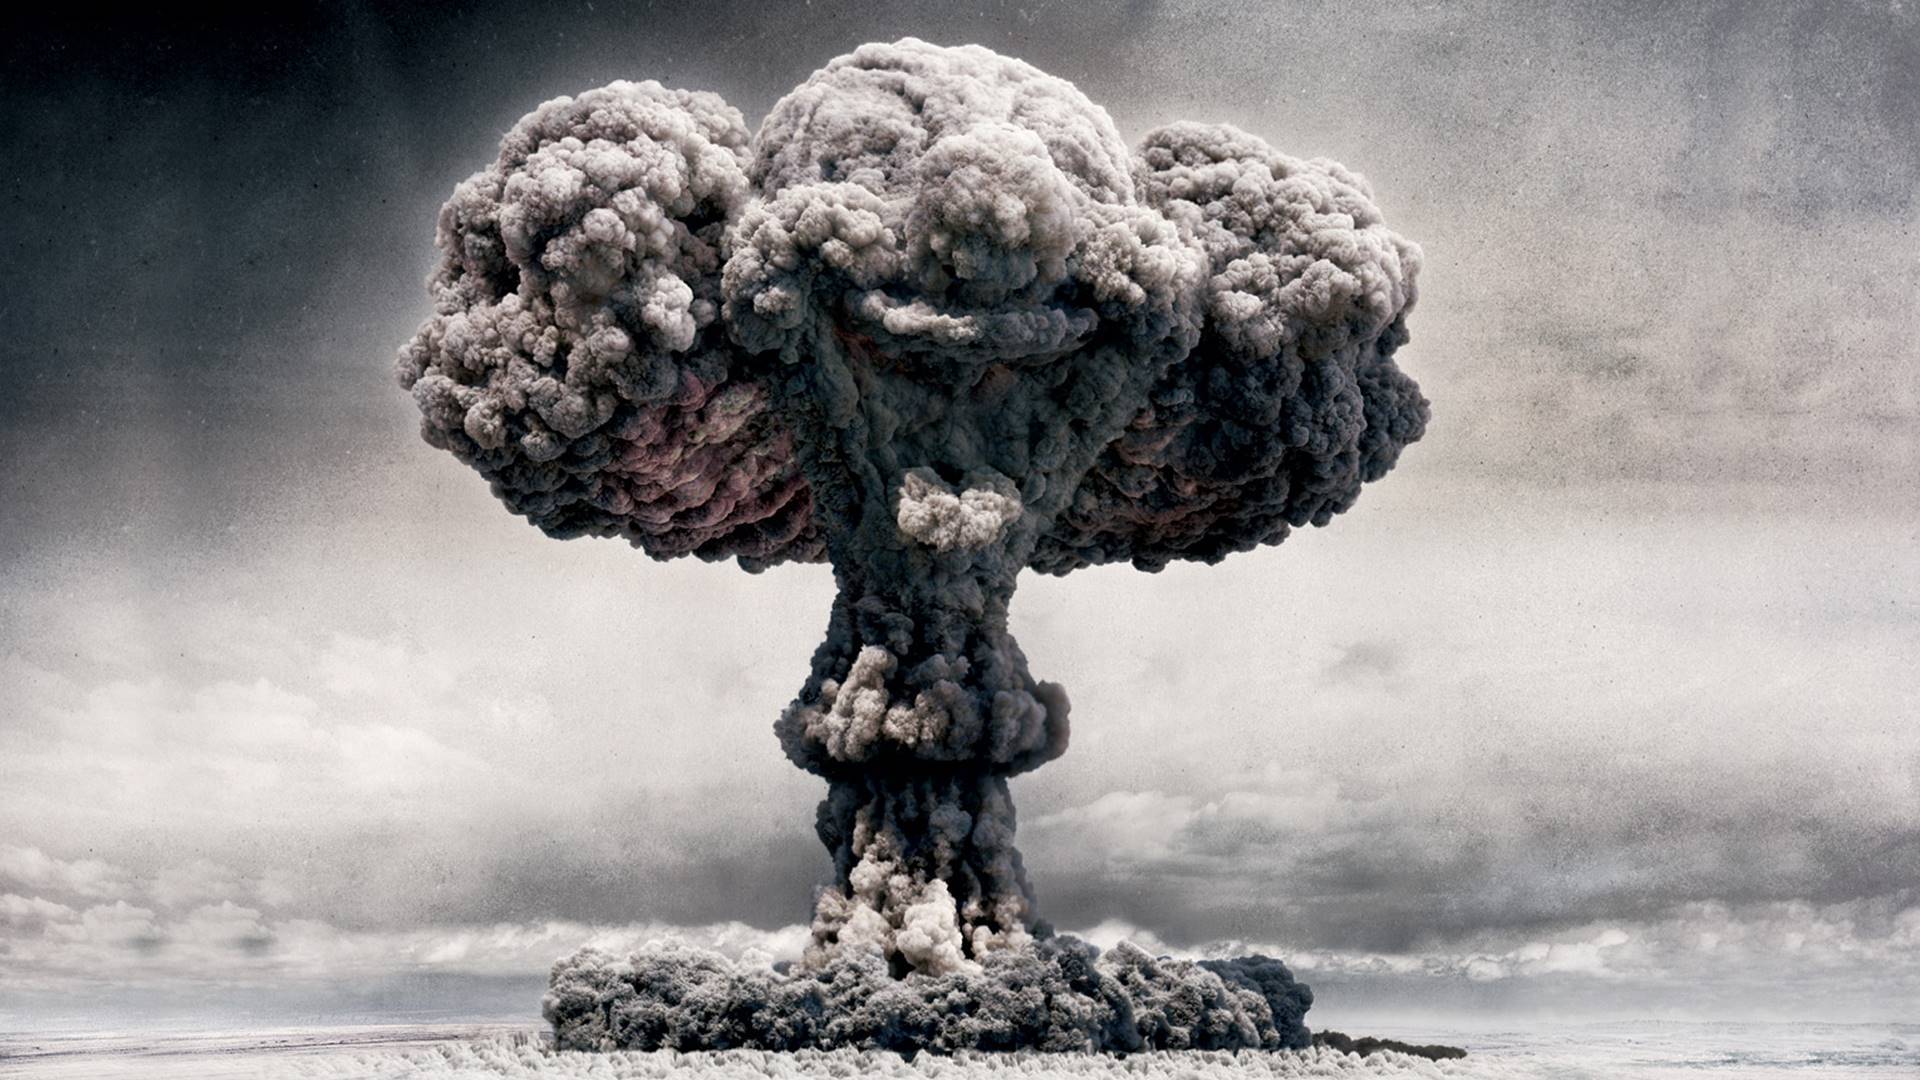 14 Nuclear HD Wallpapers | Backgrounds - Wallpaper Abyss